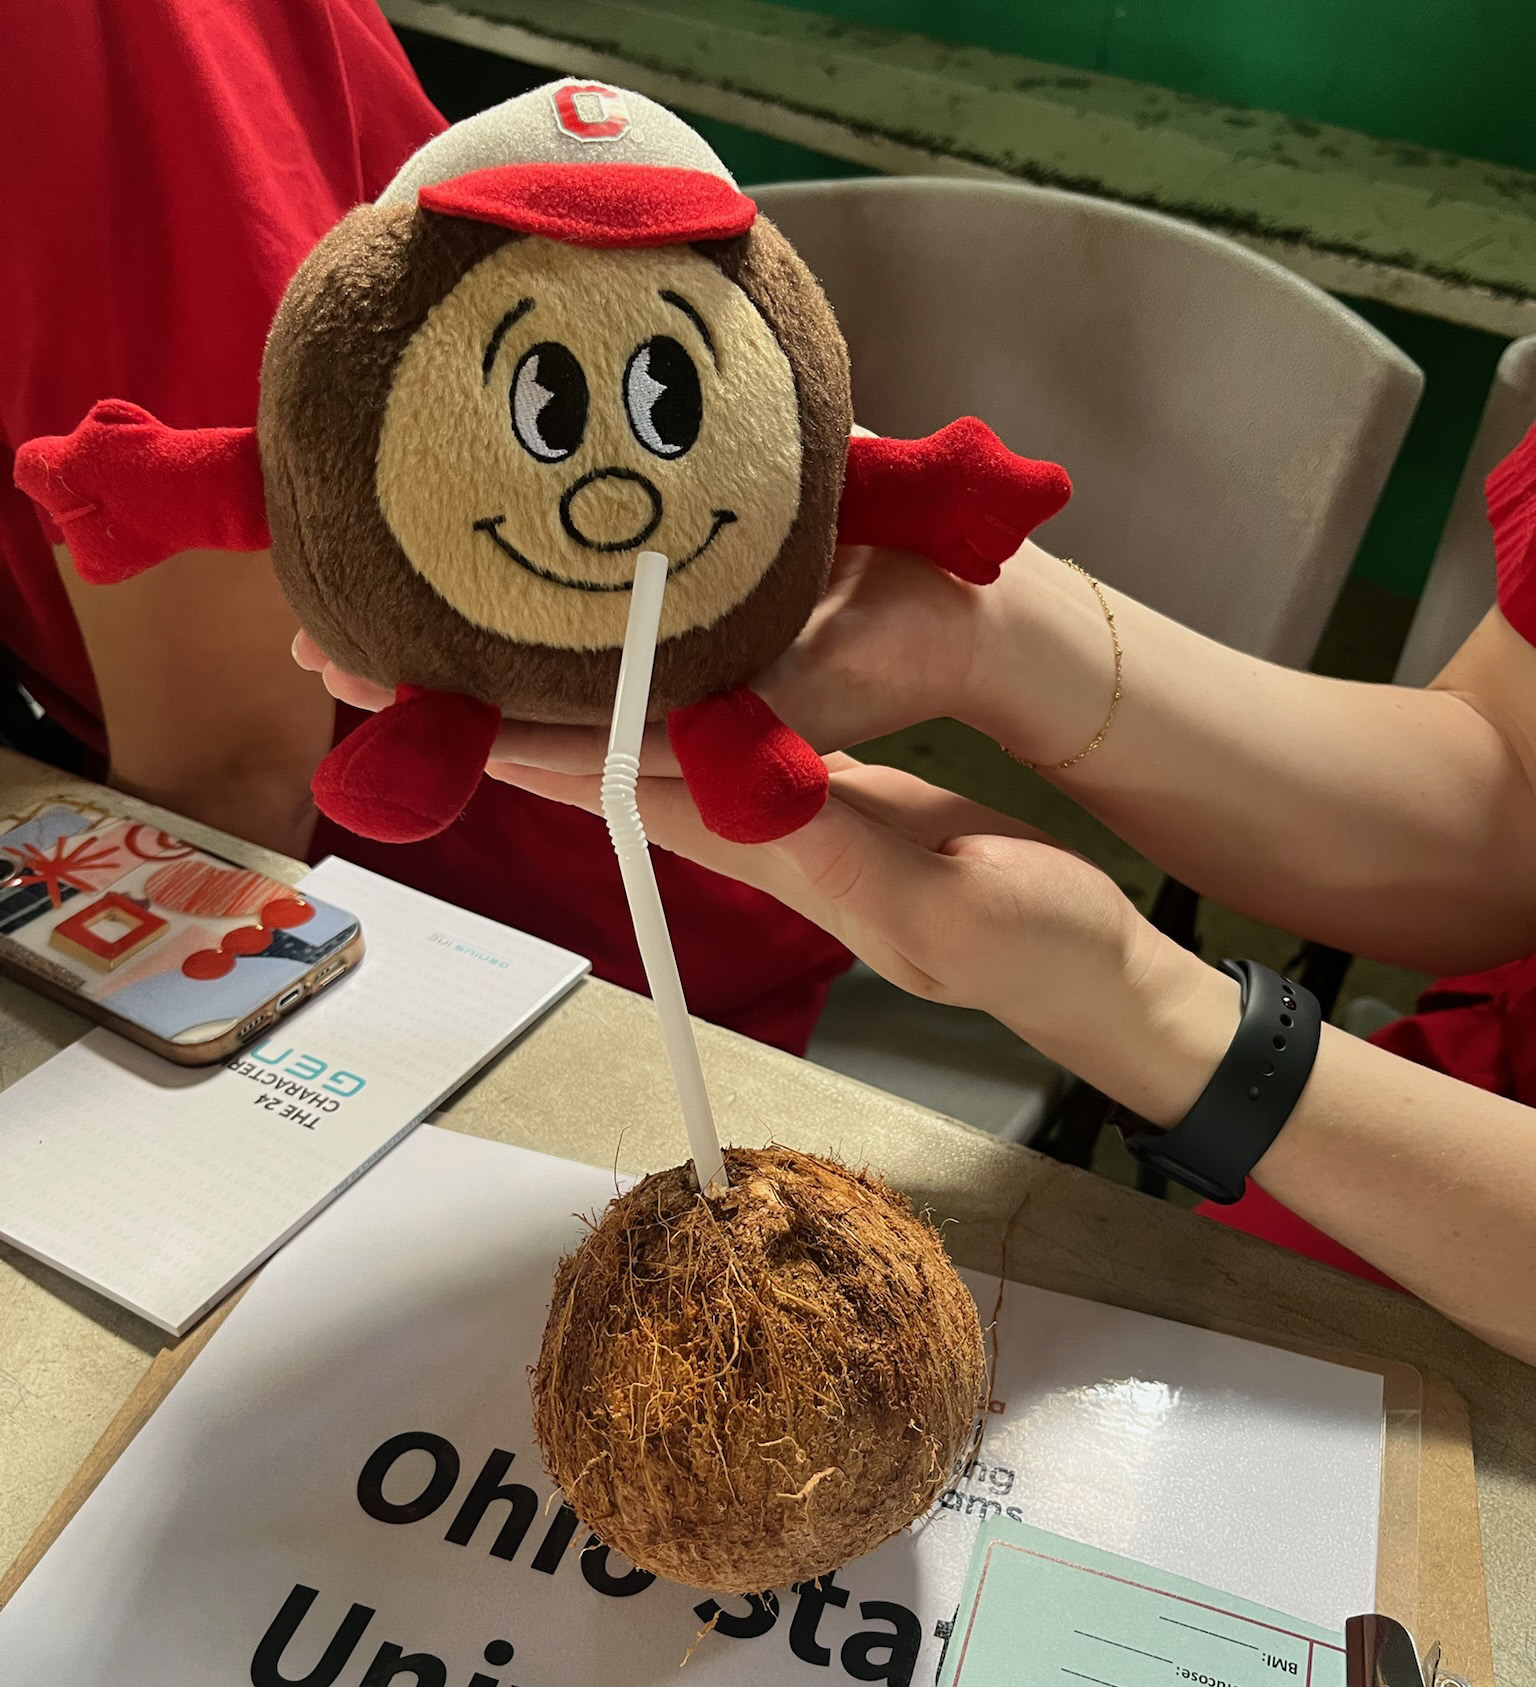 Brutus plush toy sipping from a coconut